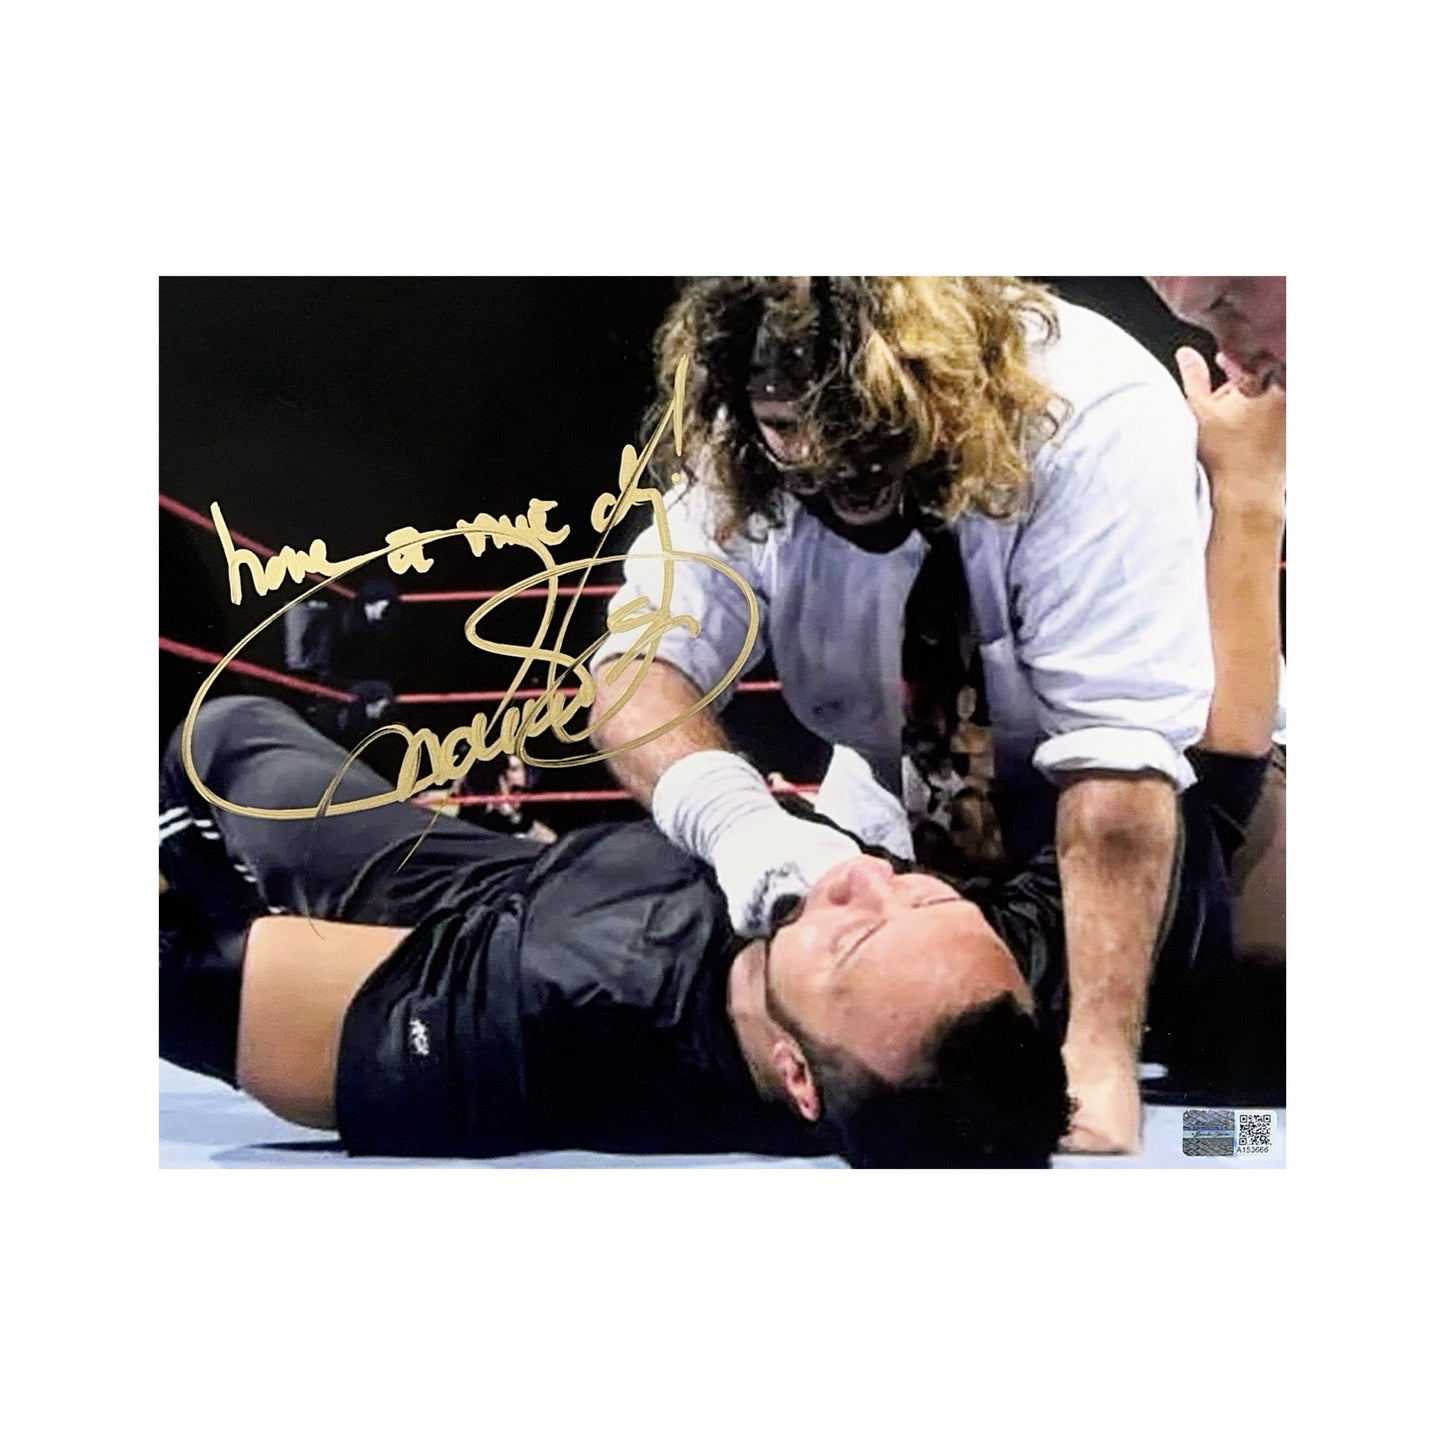 Mick Foley Autographed Mankind WWE Socko vs The Rock 8x10 “Have a Nice Day” Inscription Steiner CX